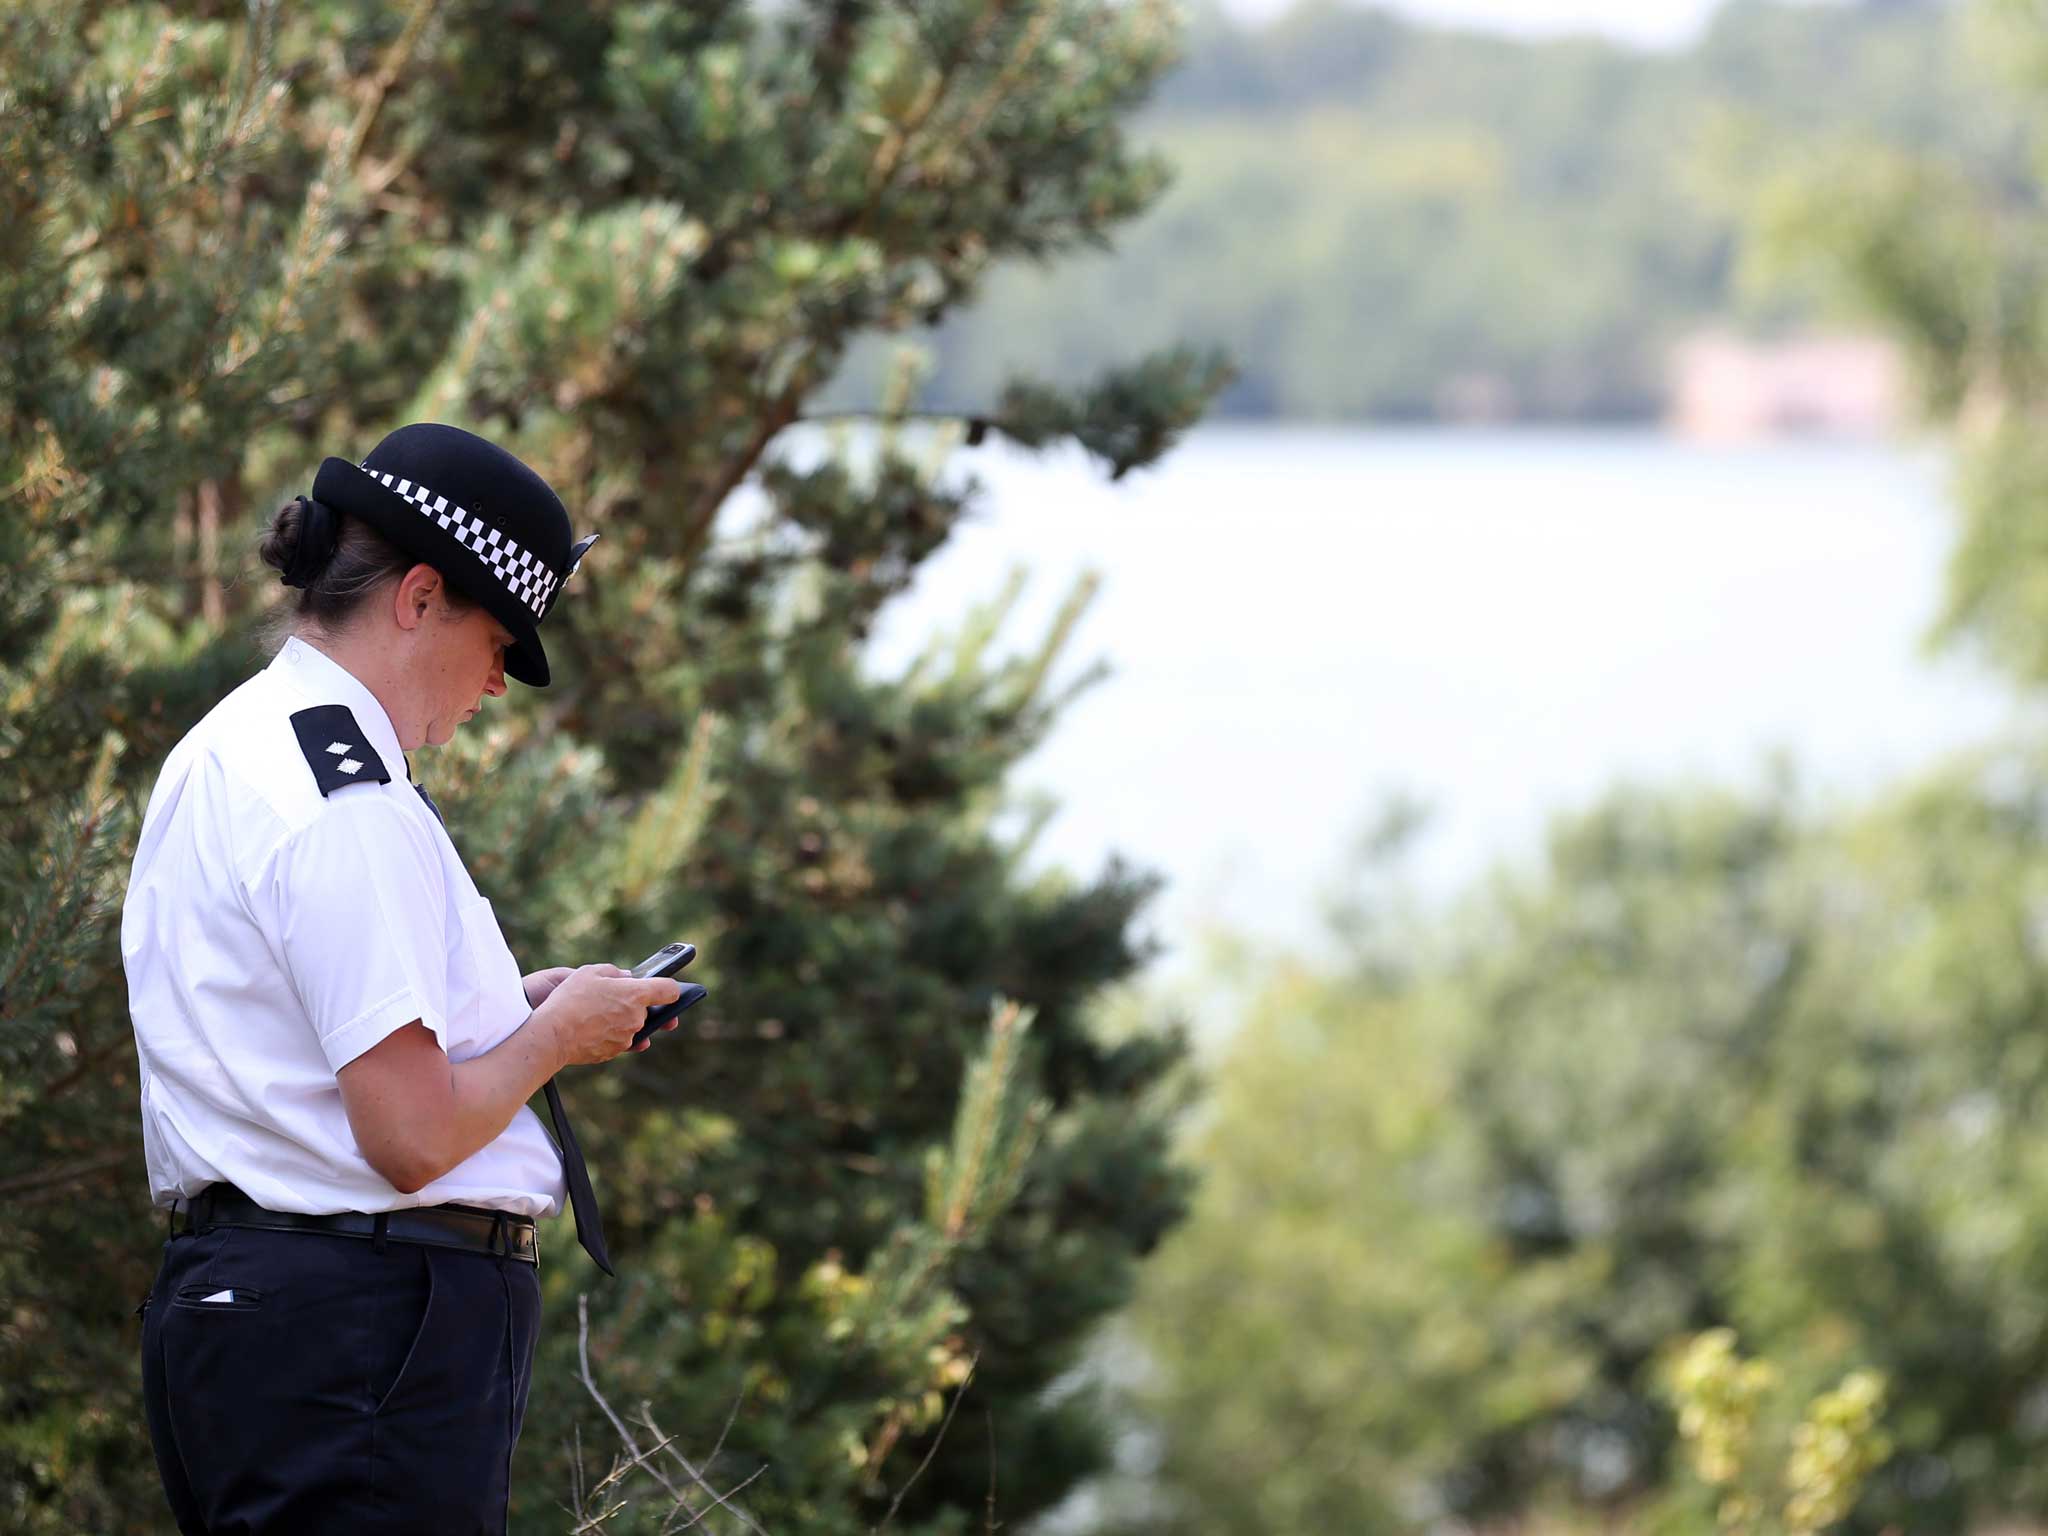 A police officer stands beside the water at Bawsey Pits